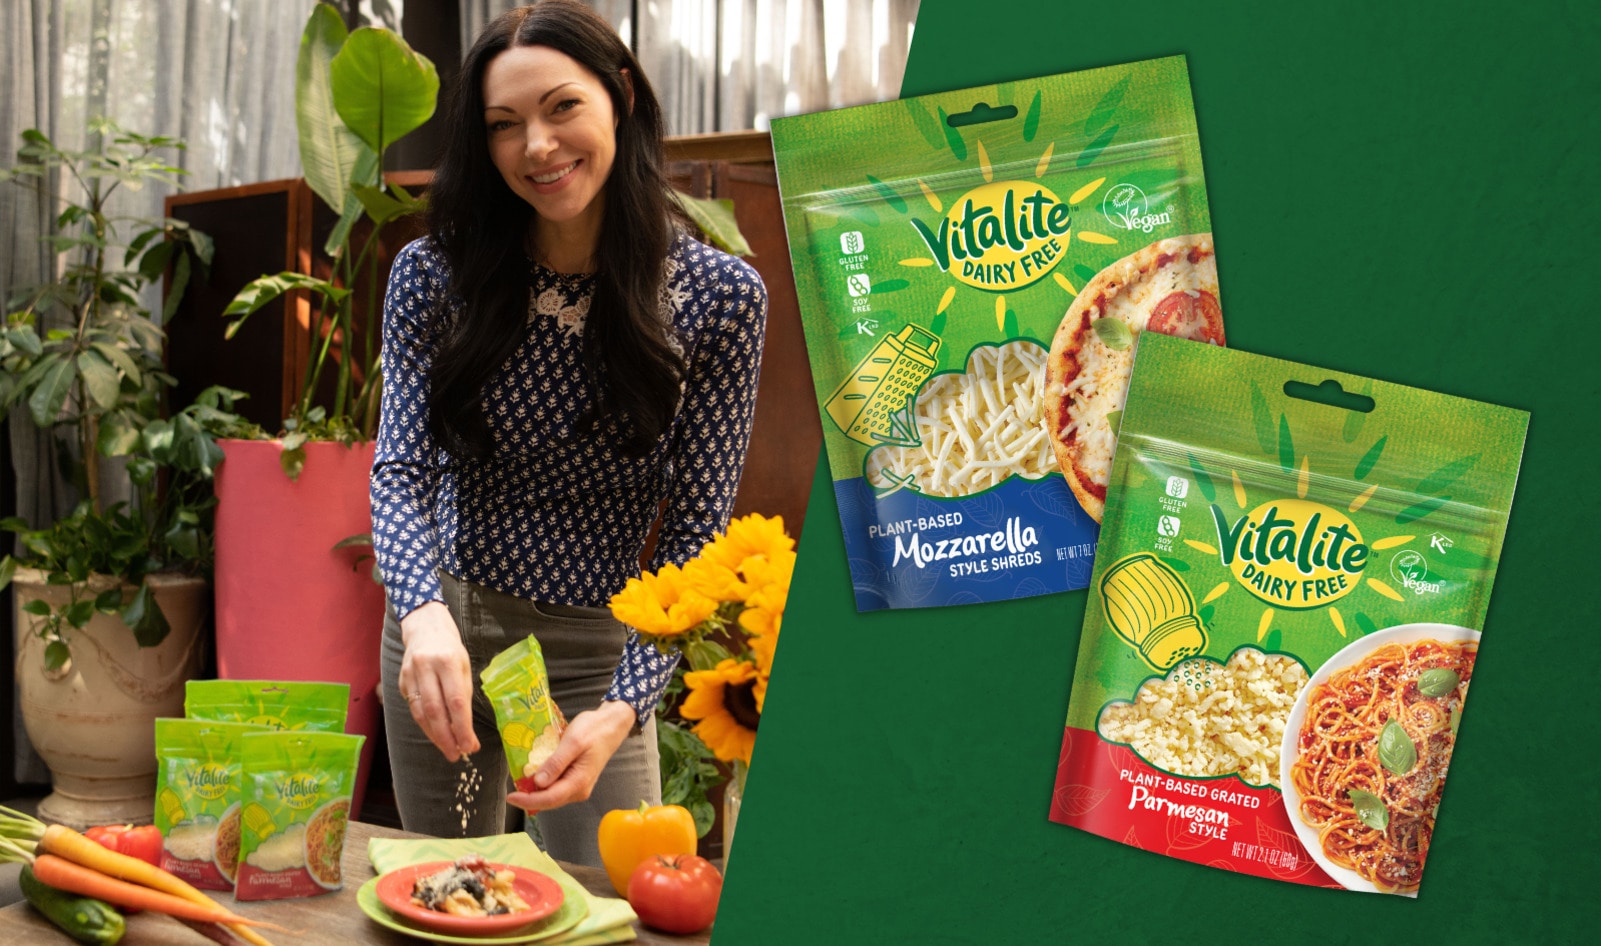 OITNB's Laura Prepon on Going Dairy-Free with Saputo's First Vegan Cheese Line | VegNews